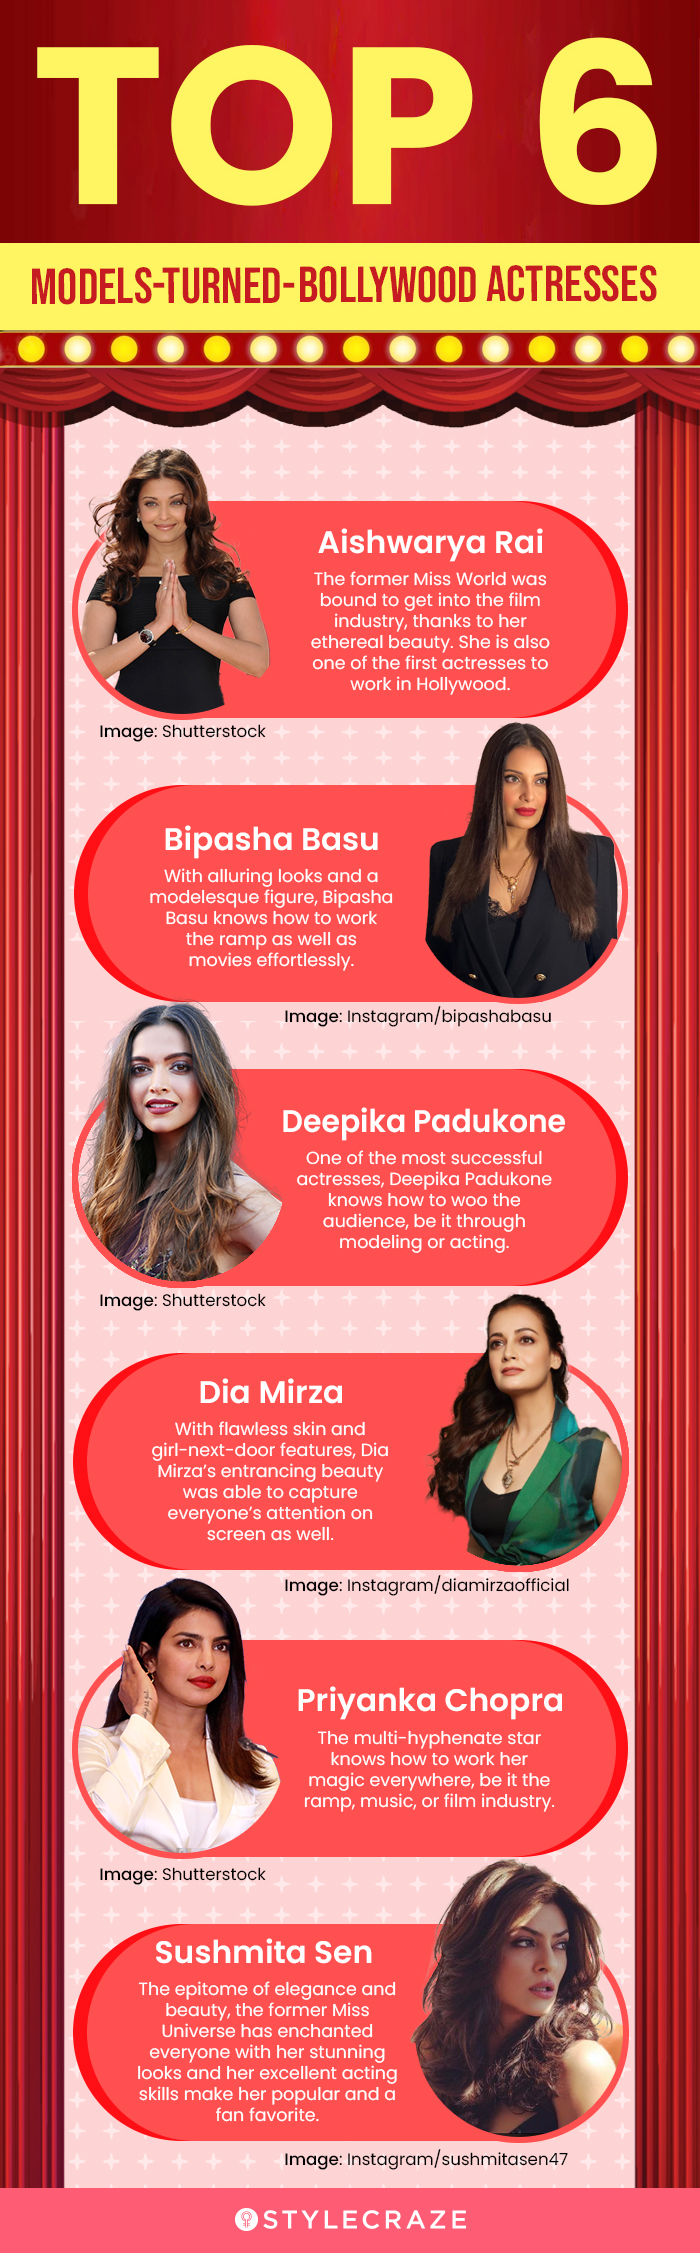 top 6 model turned bollywood actresses (infographic)